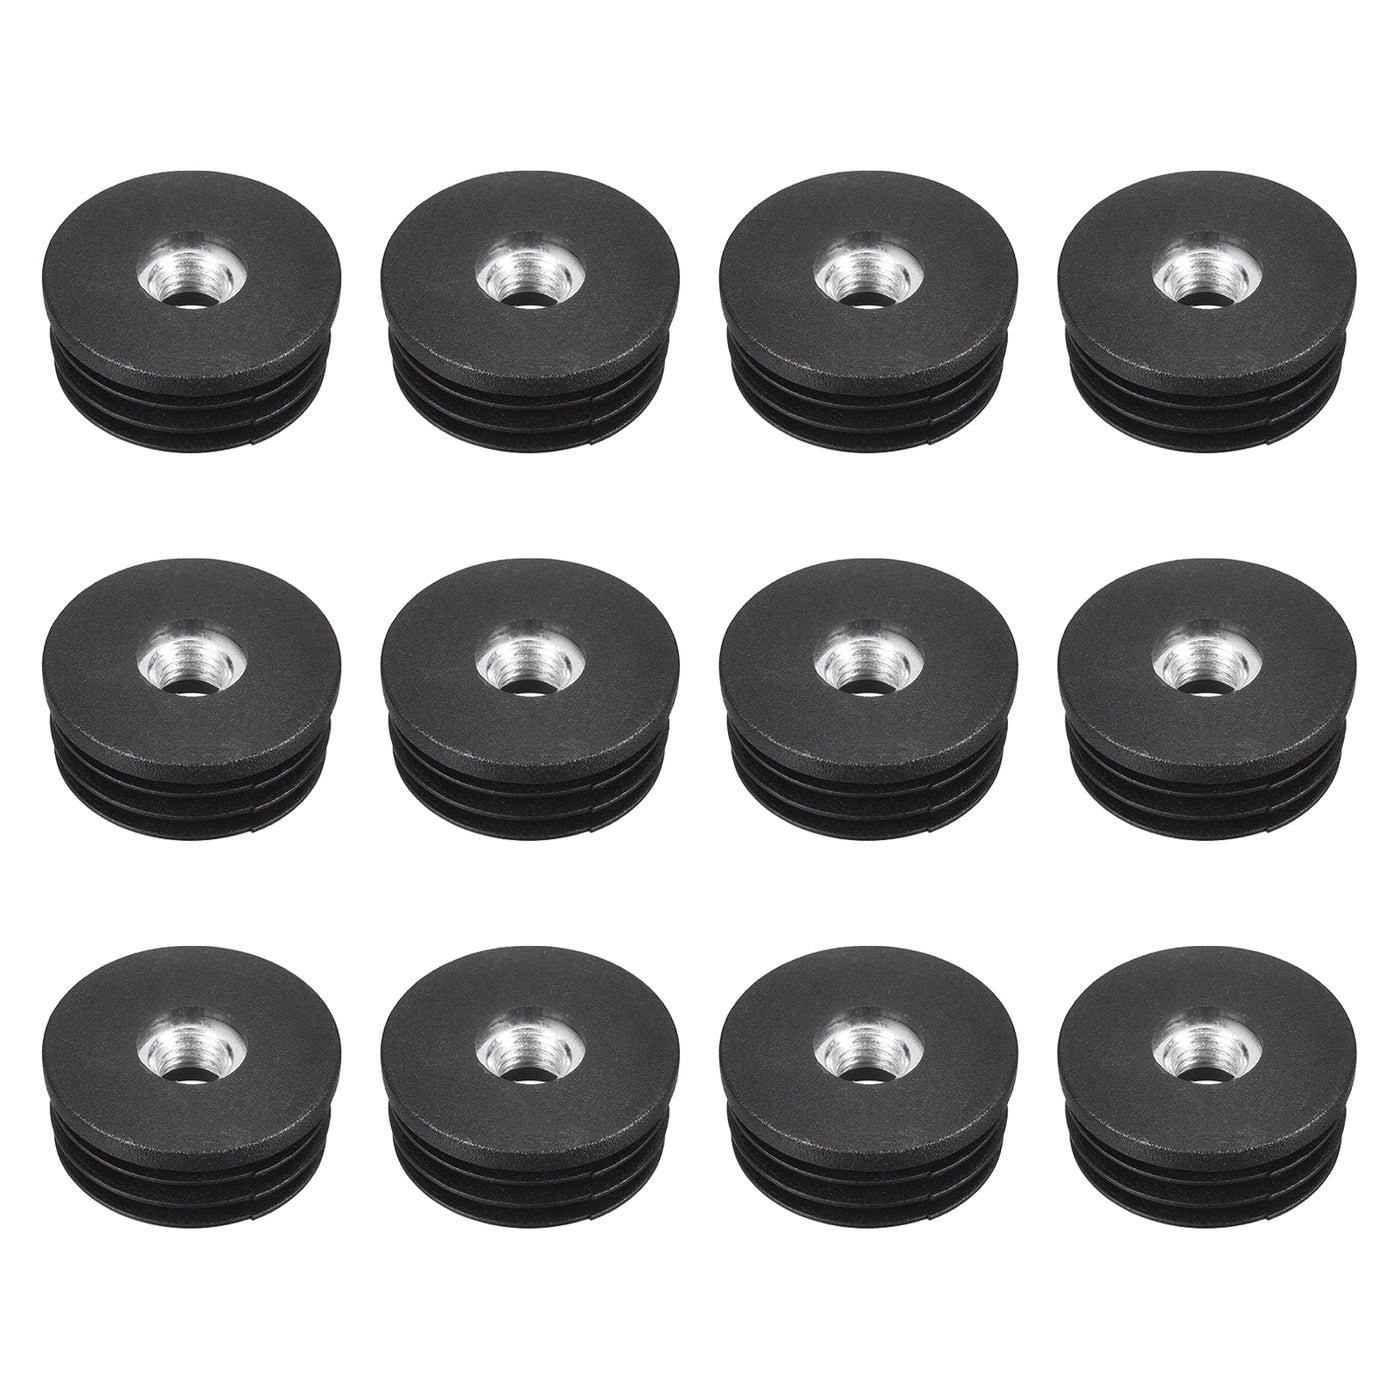 uxcell Uxcell 12Pcs 32mm/1.26" Caster Insert with Thread, Round M8 Thread for Furniture